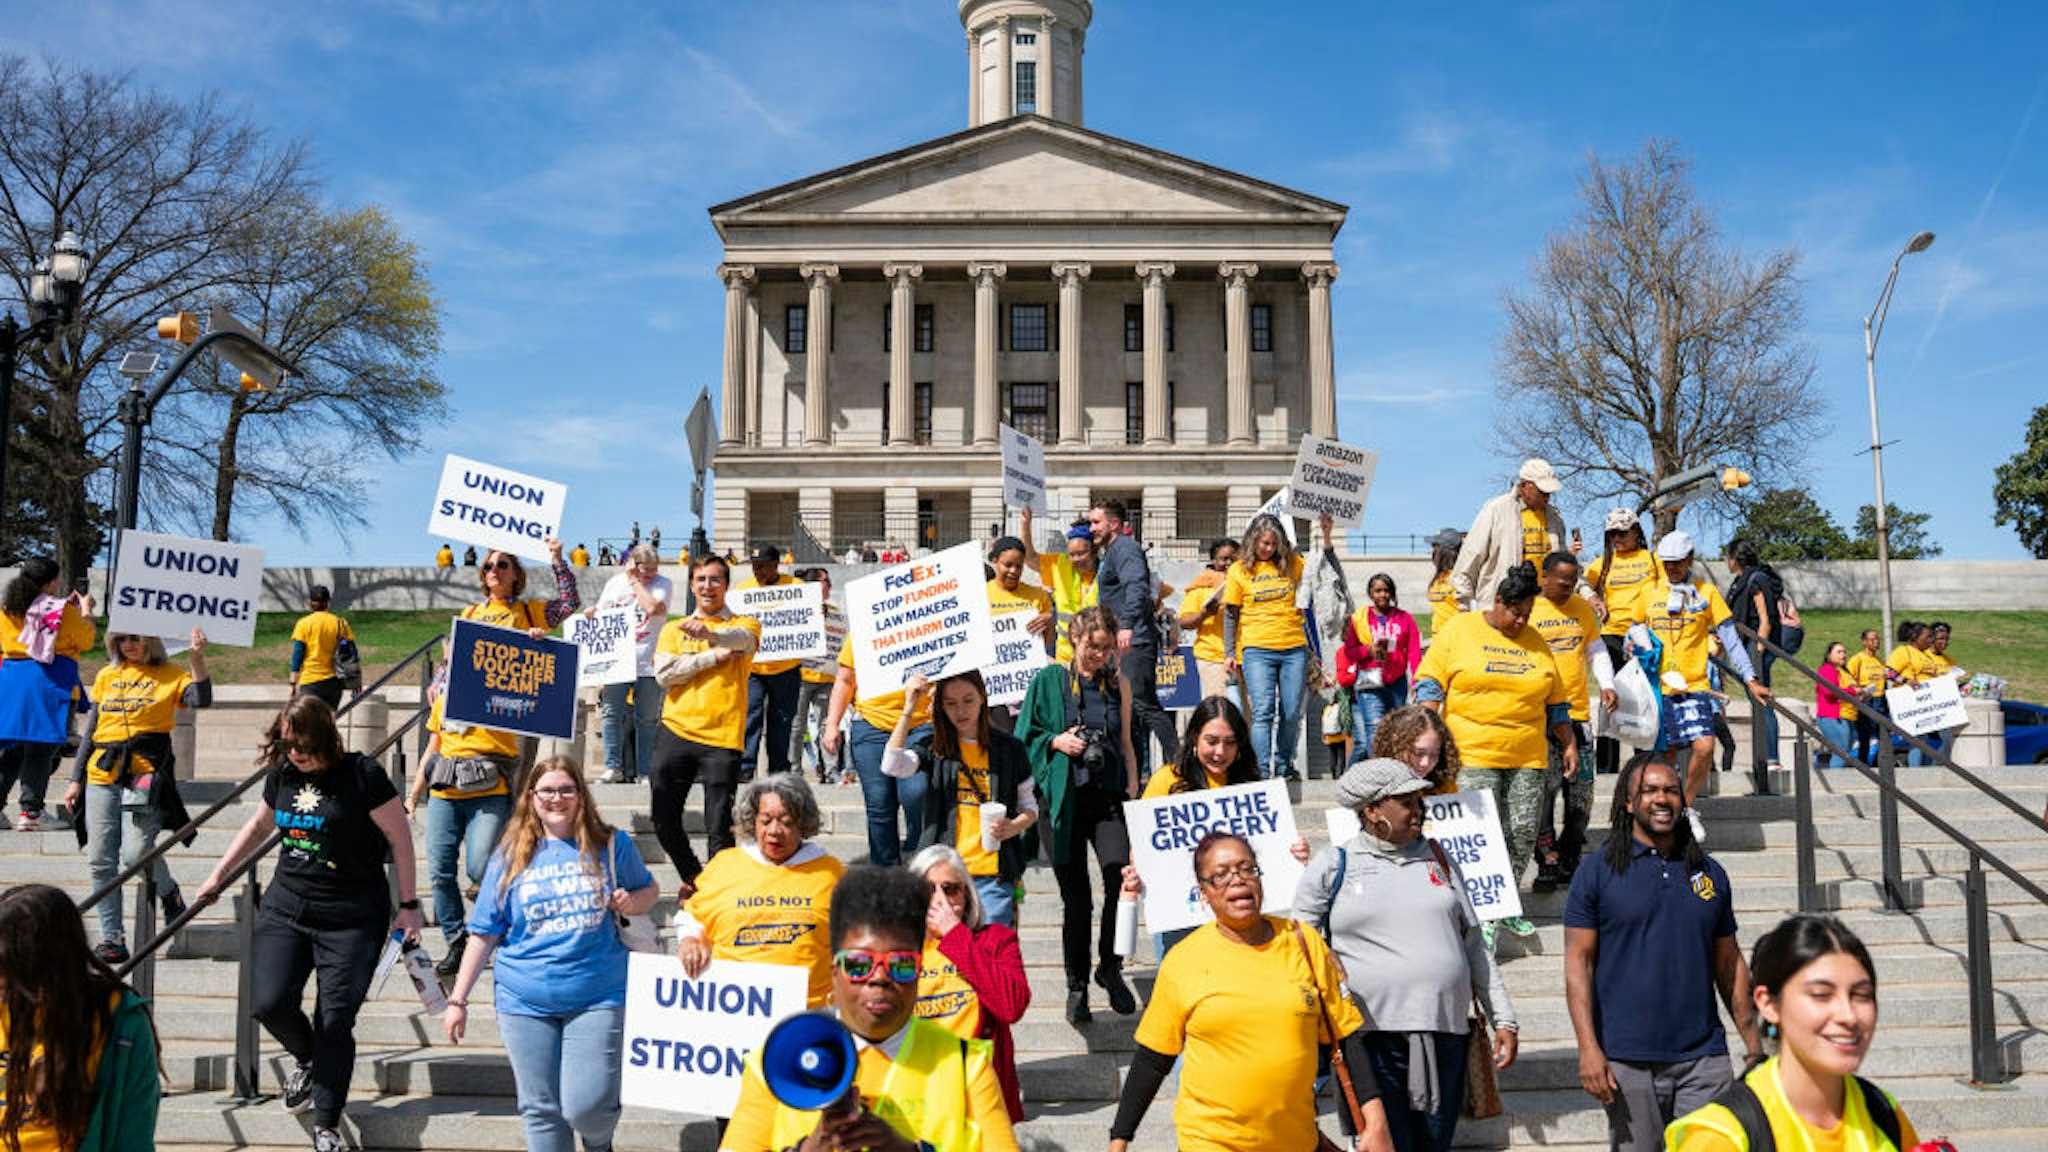 NASHVILLE, TENNESSEE - MARCH 12: Educators and various organizations from across the state of Tennessee convened outside of the Tennessee State Capitol building to rally against Governor Bill Lee's school voucher program on March 12, 2024 in Nashville, Tennessee. Rural, urban, and suburban school districts across the state have passed resolutions opposing the program which they say would divert resources from Tennessee's already underfunded public schools.